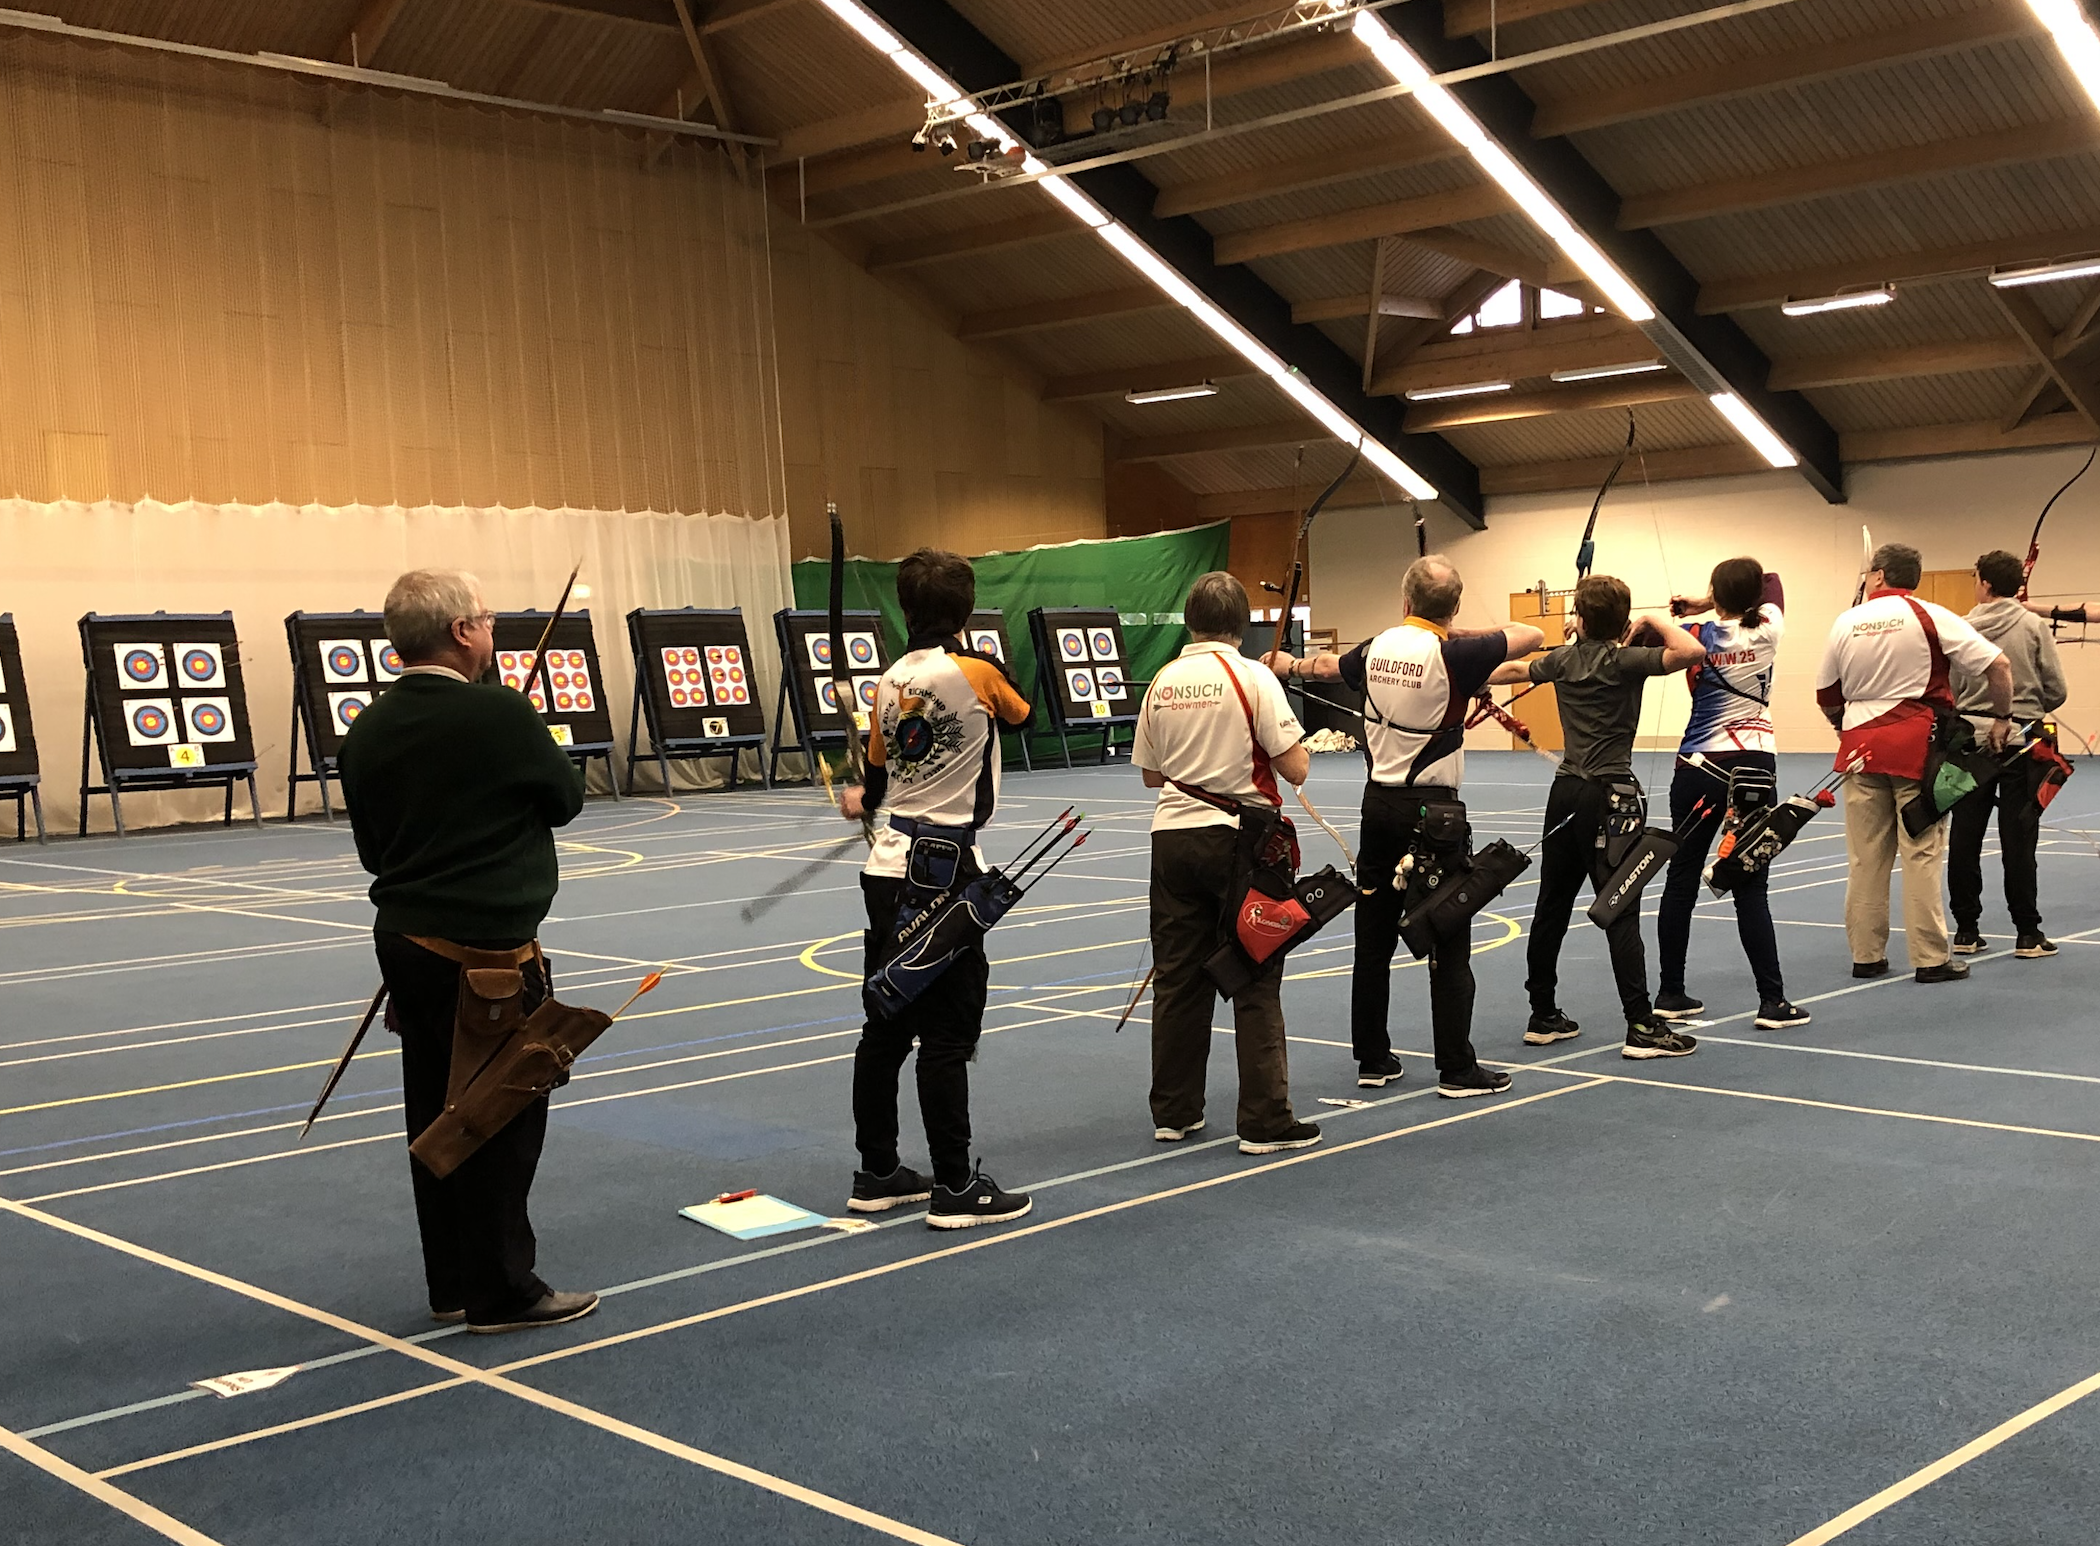 Indoor archery returns to the King's Centre